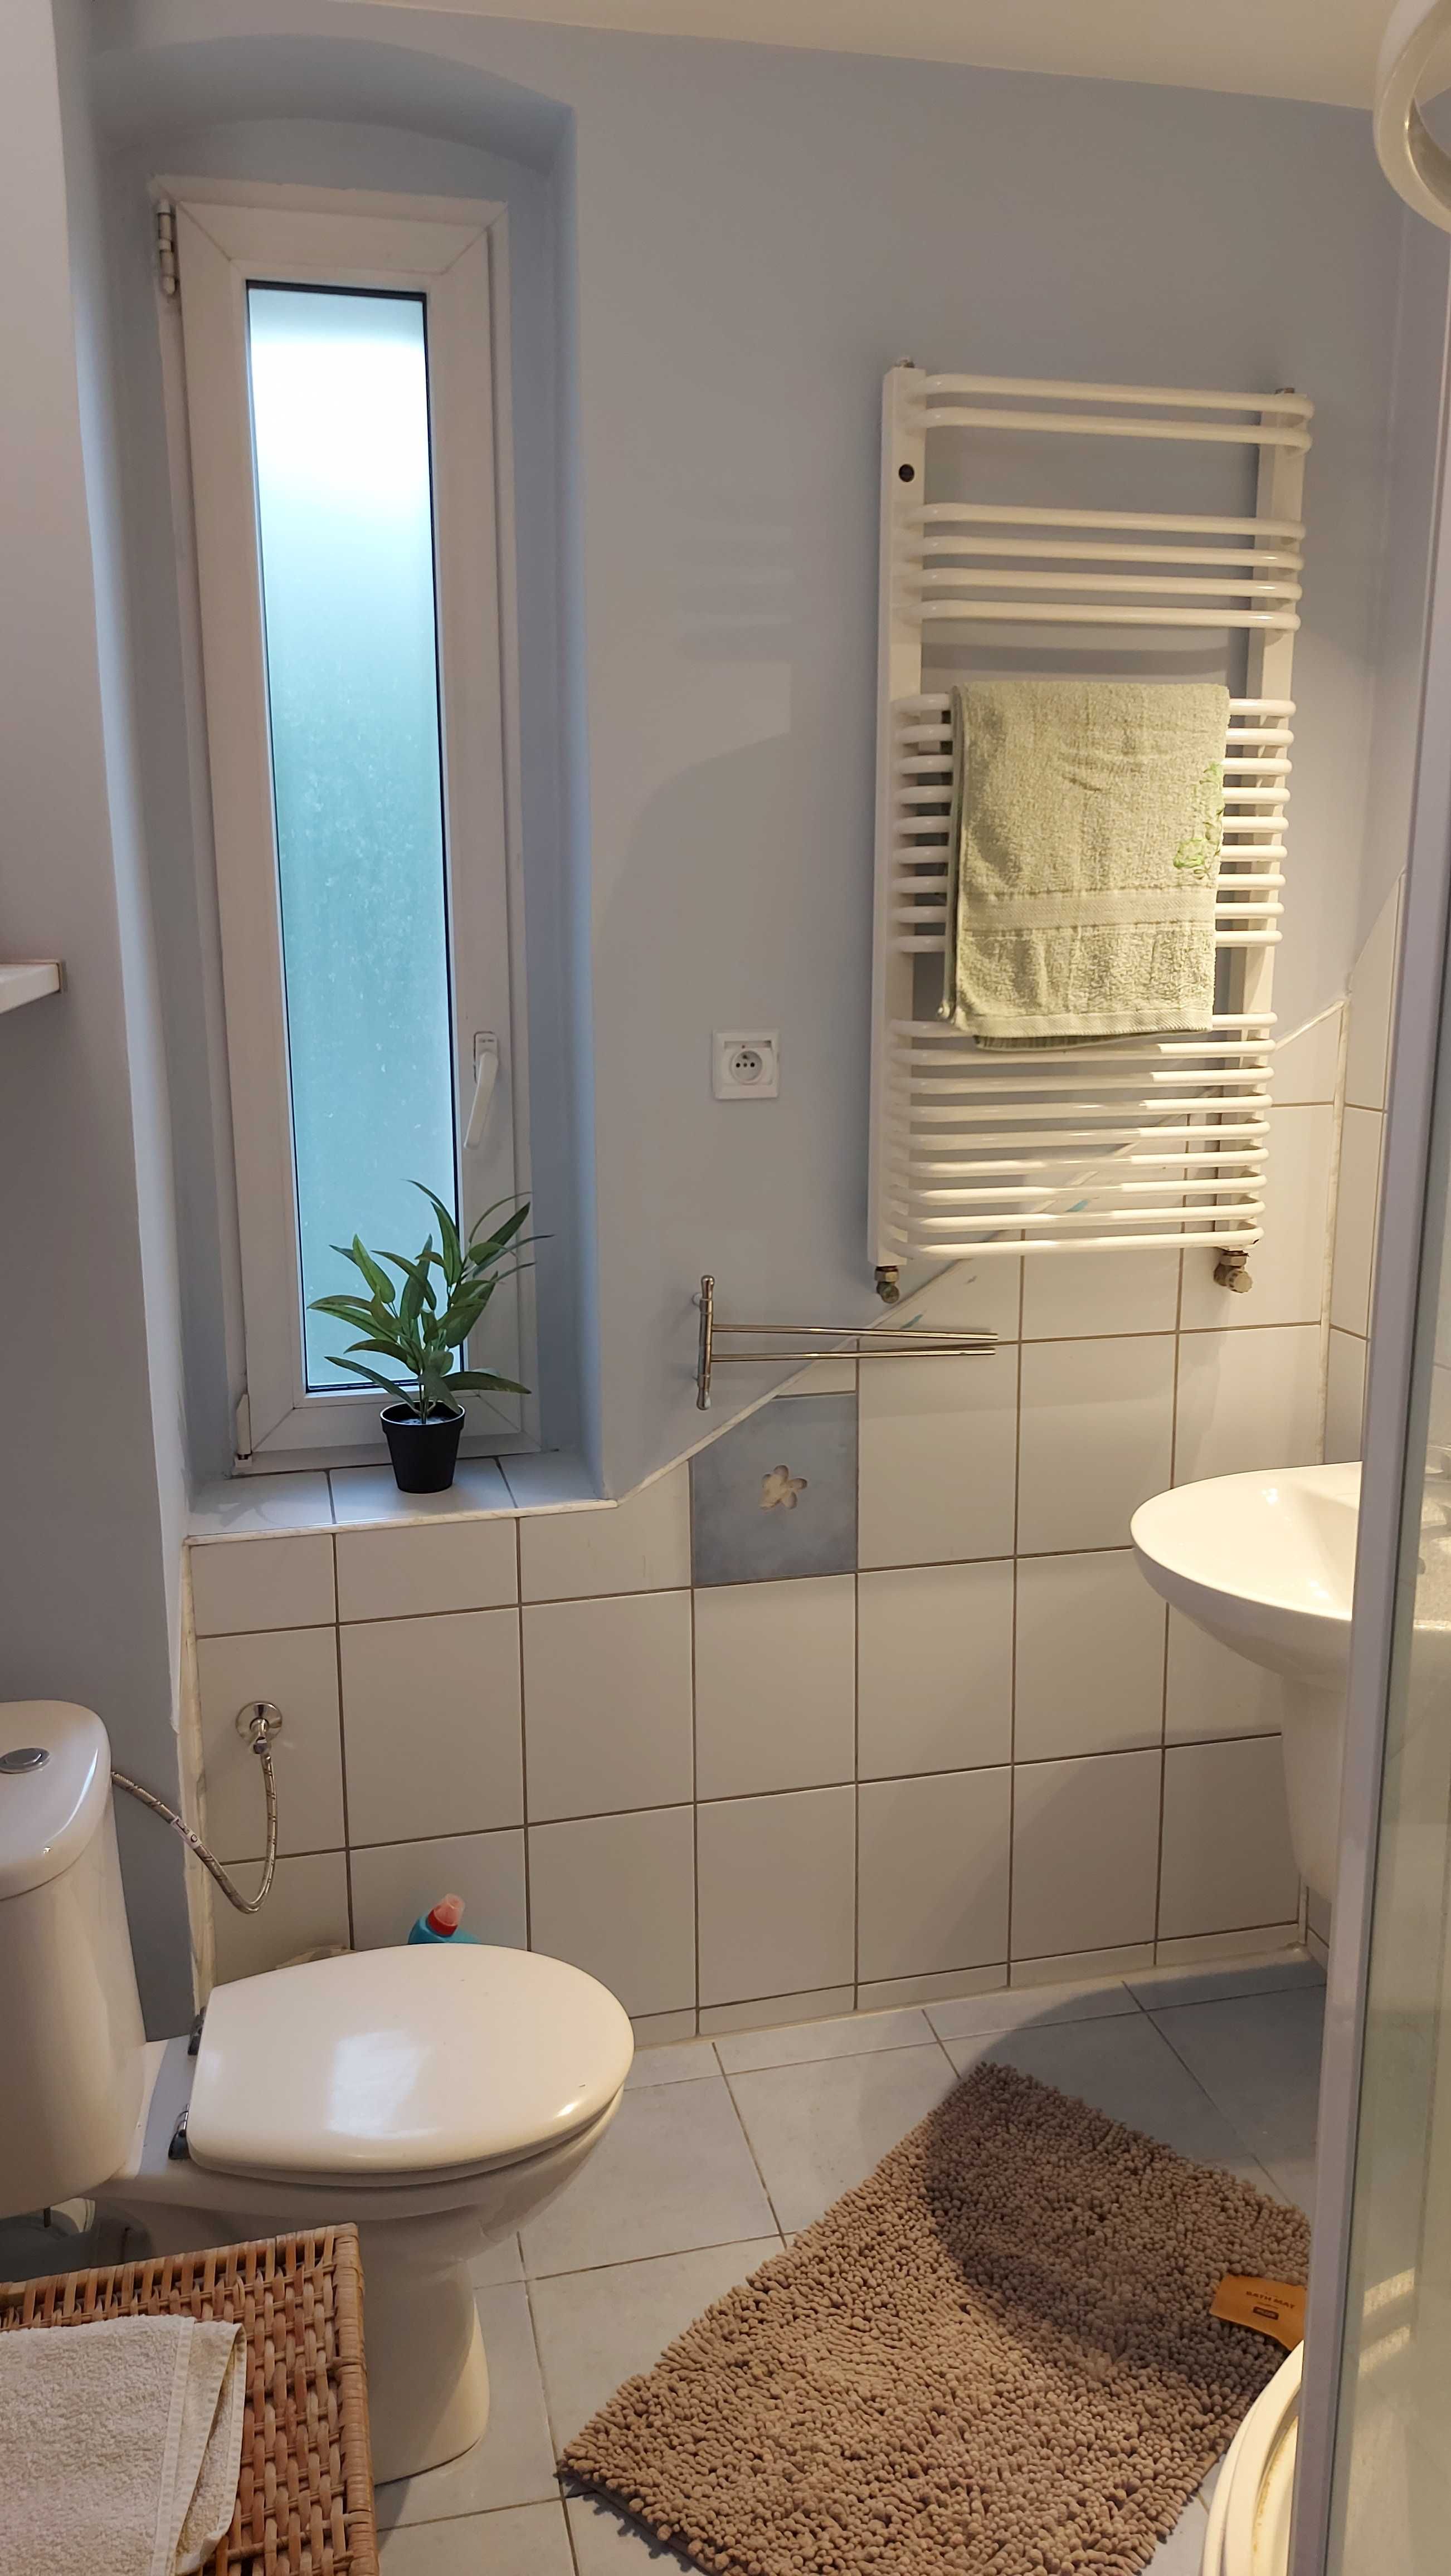 Appartement 1 chambre 34 m² en Wroclaw, Pologne